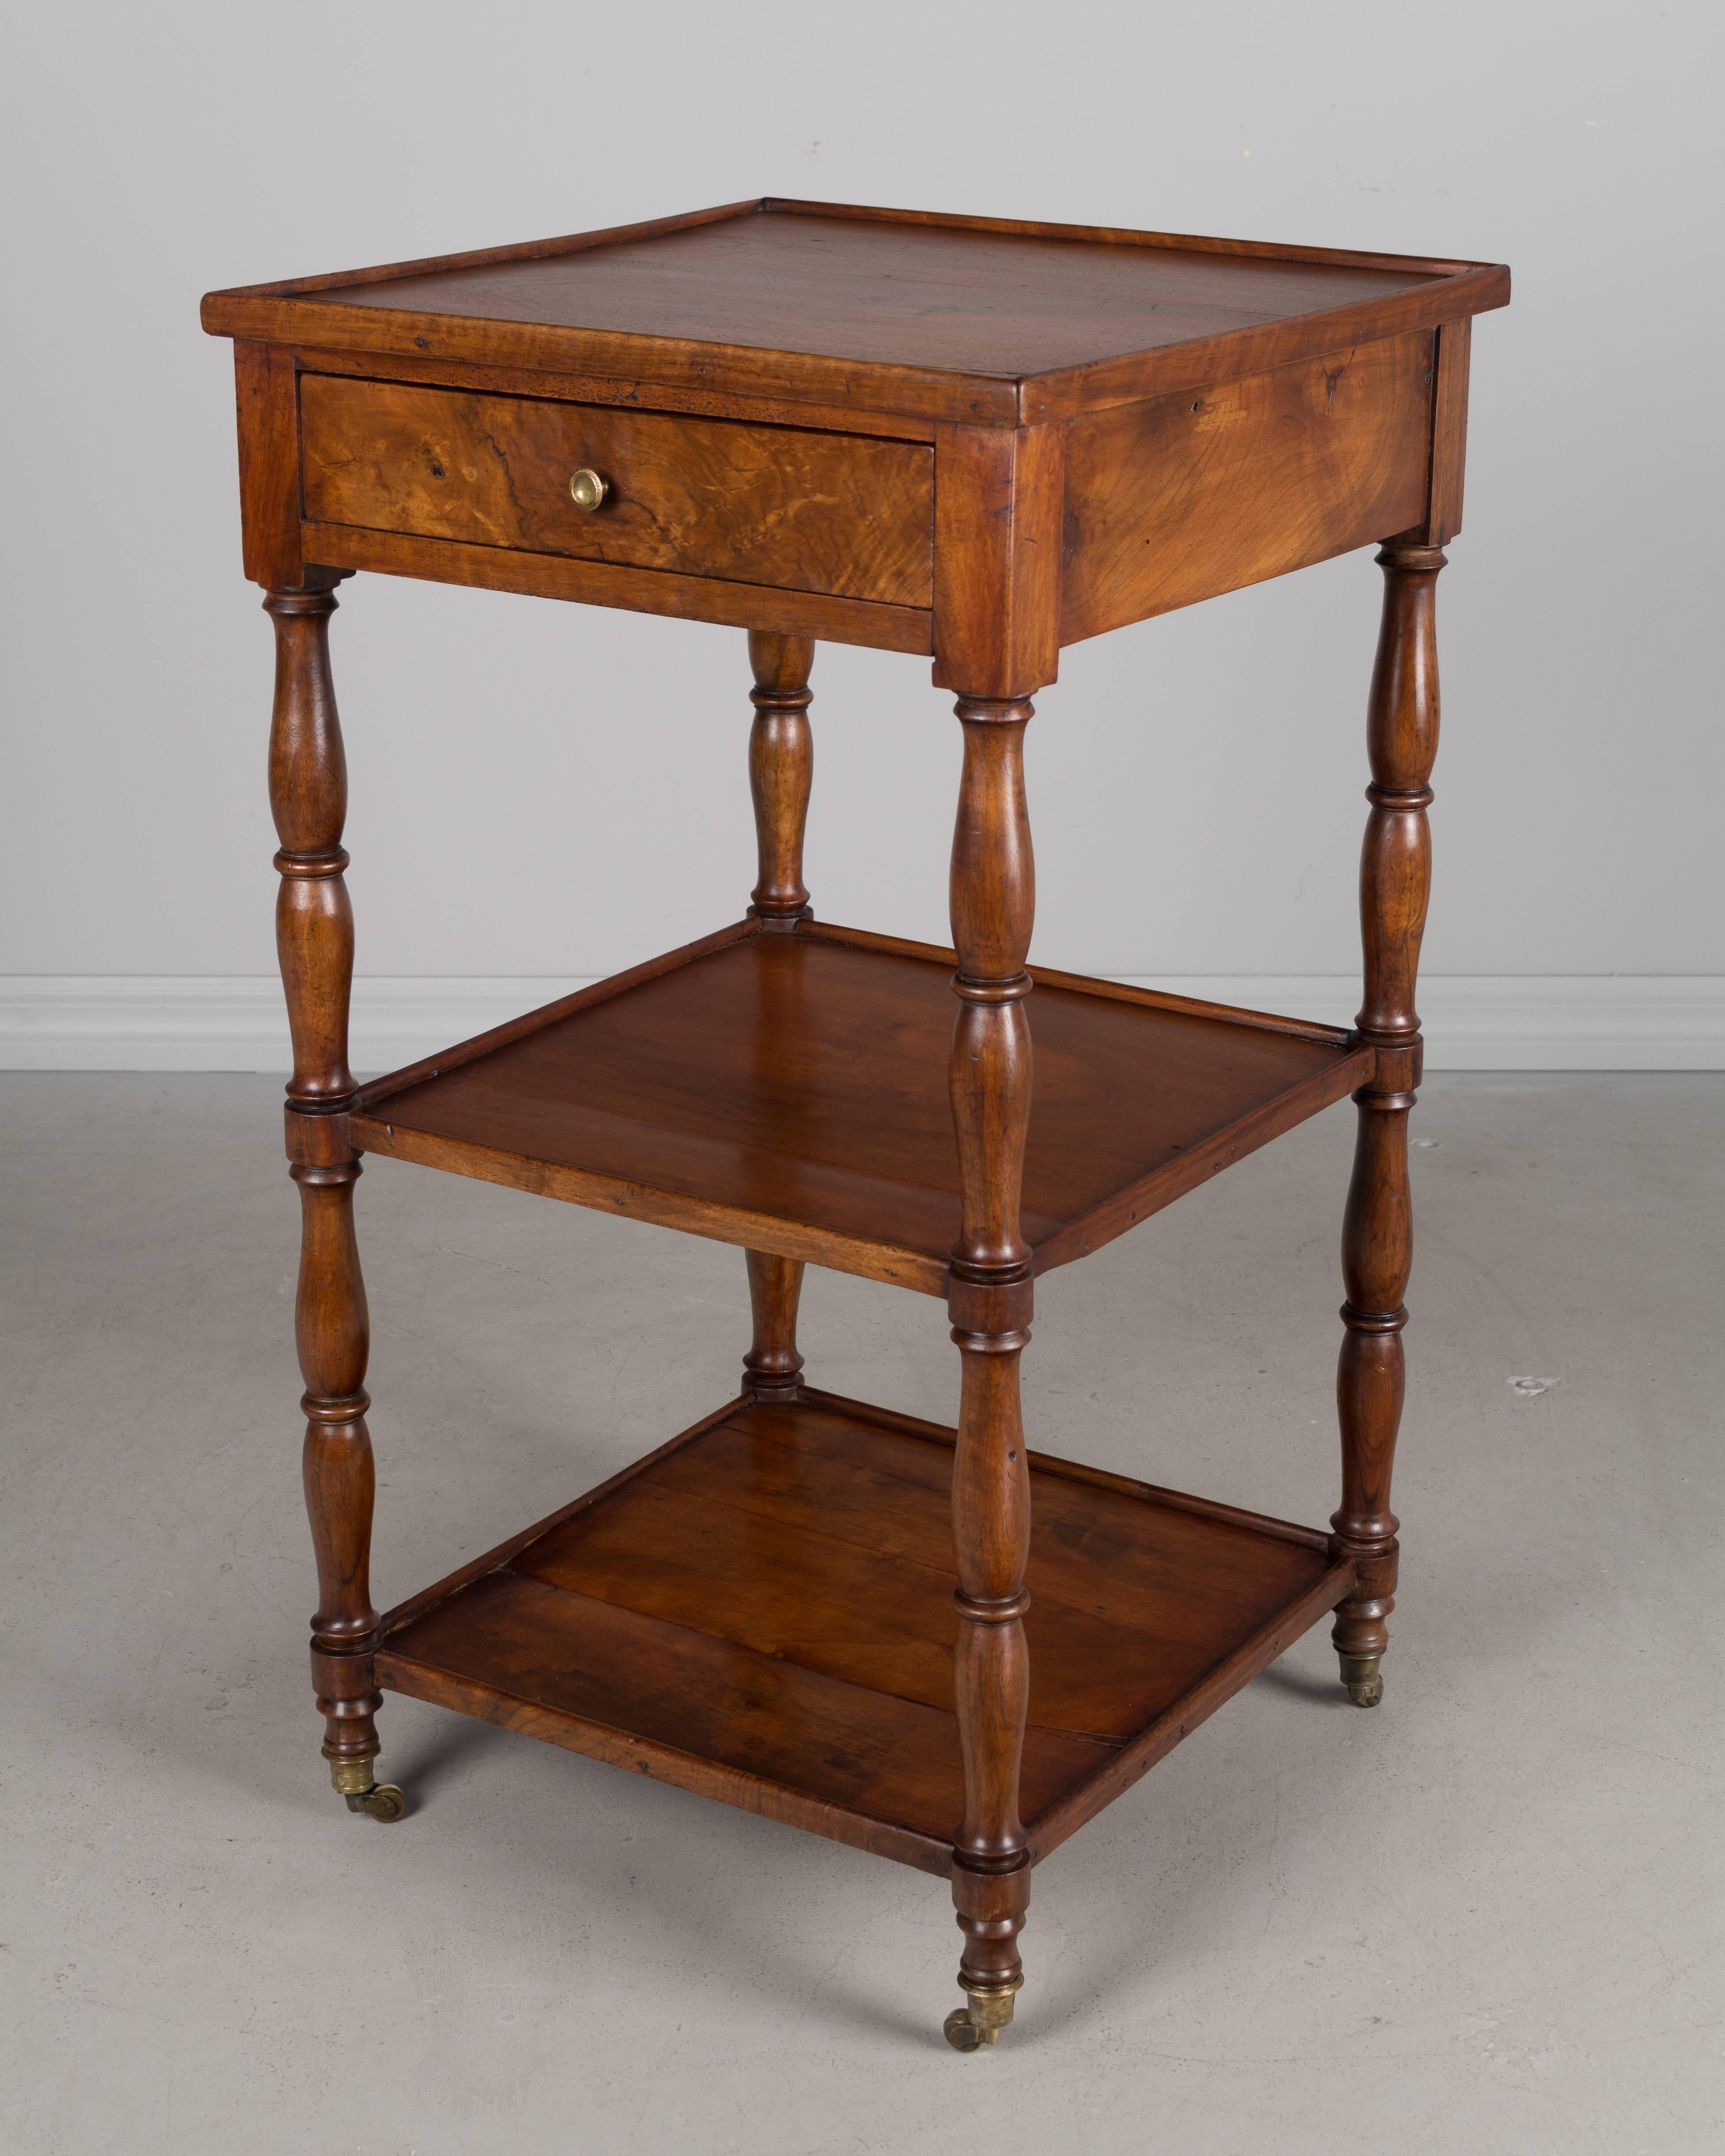 An early 19th century French Louis-Philippe side table or small étagère, made of mahogany with one dovetailed drawer and turned spindles supporting two shelves. Original brass casters. Bottom shelf has been restored.
The bottom shelf is 4.5